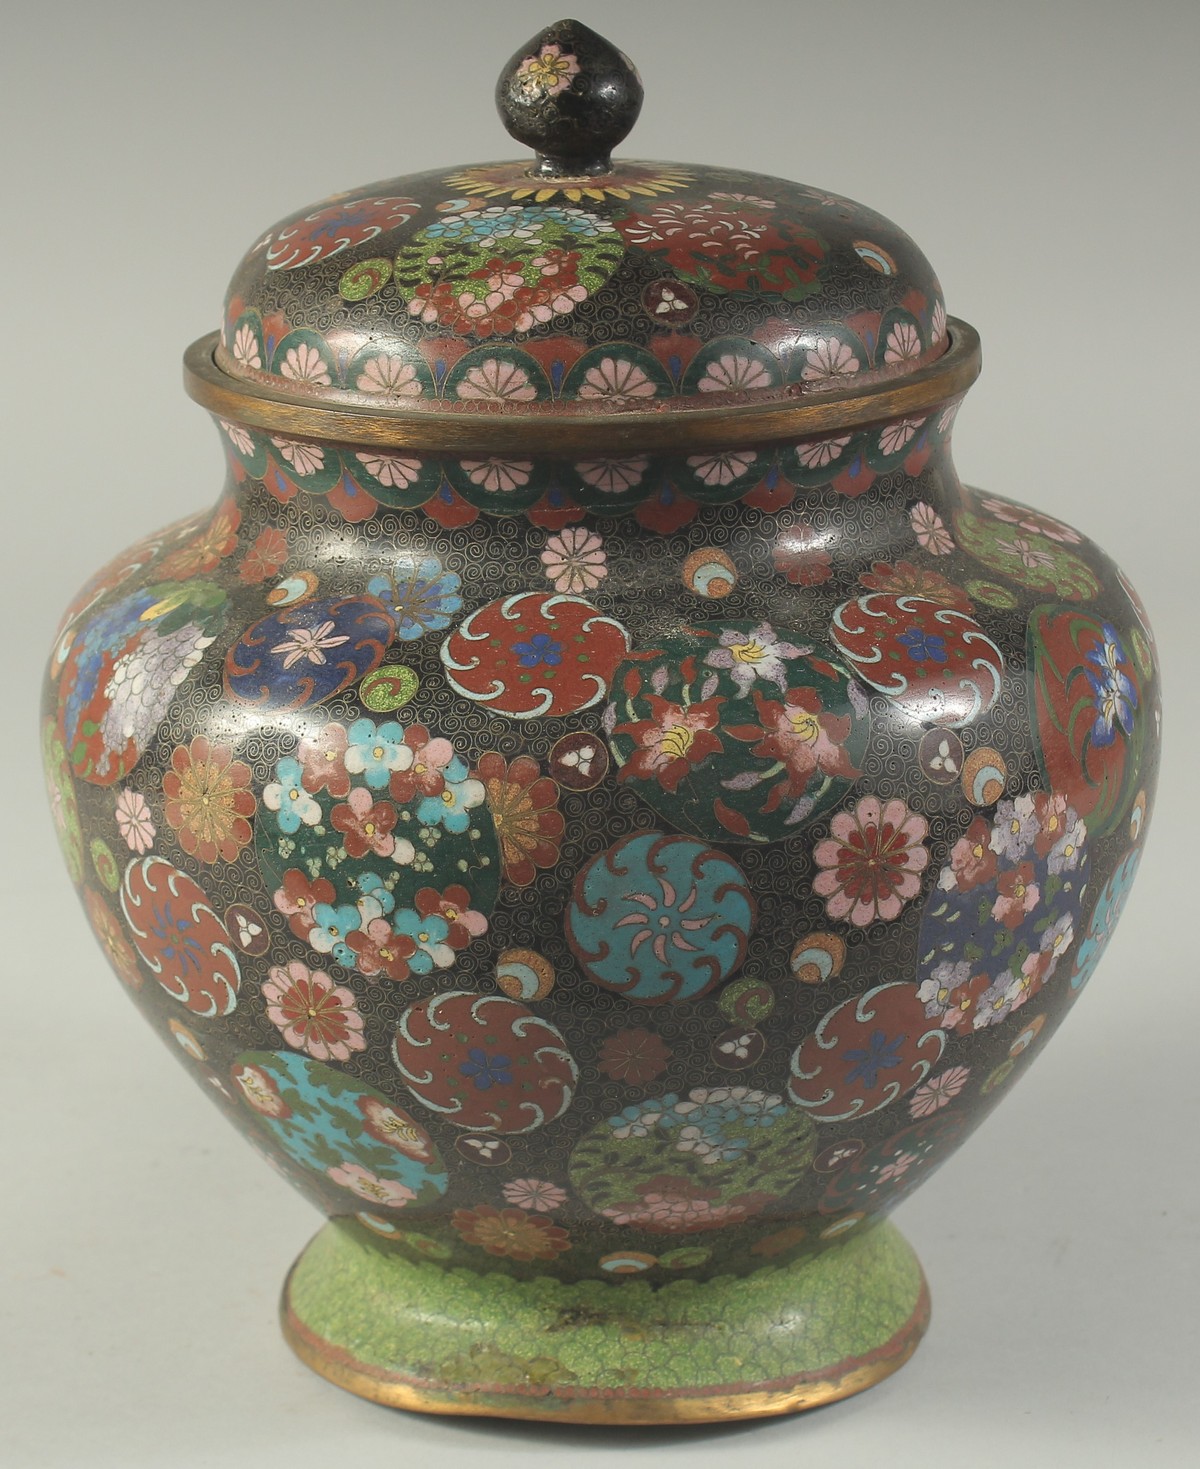 A LARGE JAPANESE BLACK GROUND CLOISONNE JAR AND COVER, with decorative floral roundels, 27cm high. - Image 2 of 7